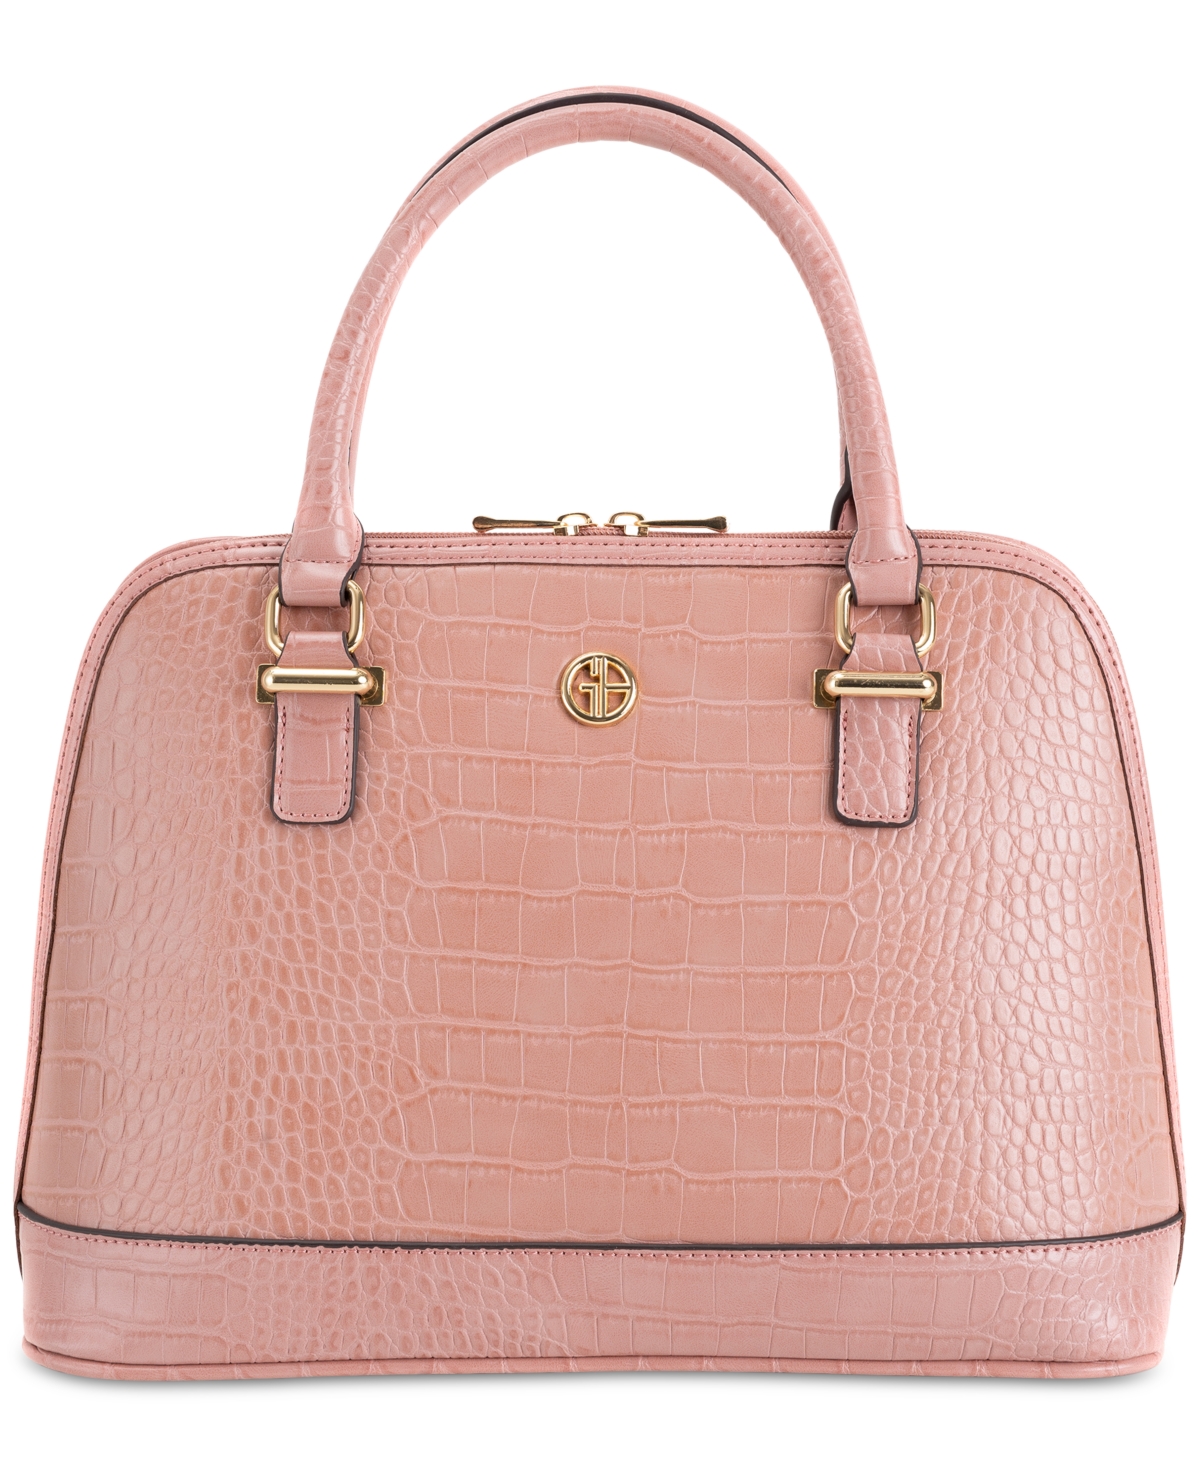 Croc-Embossed Dome Satchel, Created for Macy's - Dusty Pink